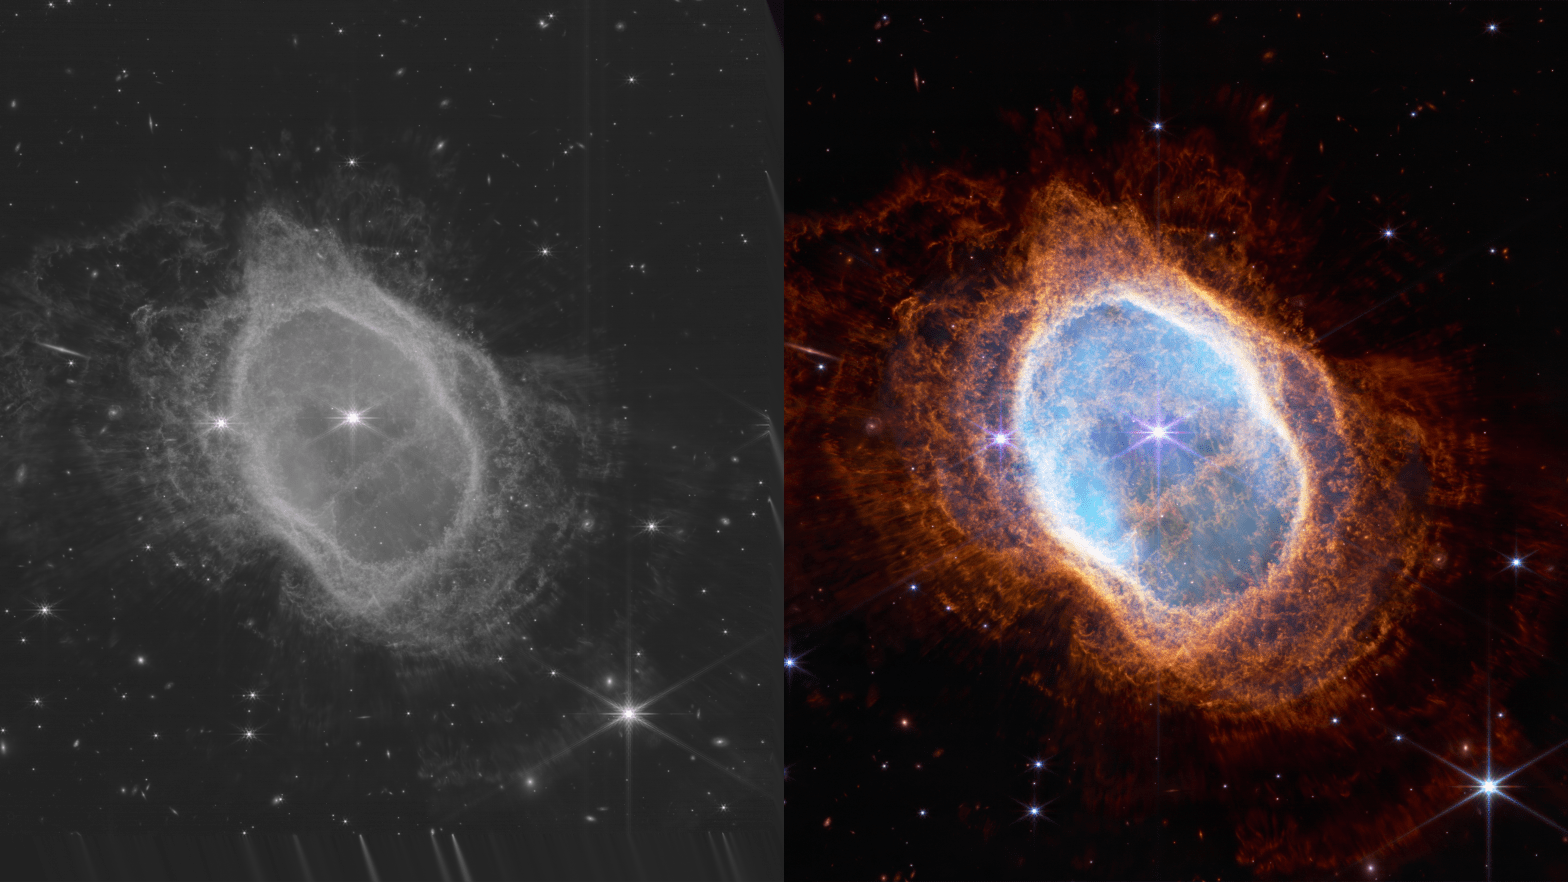 On the left is a monochromatic image showing infrared data from Webb of the Southern Ring Nebula. On the right is a processed image showing the same view in full colour. (Image: Gizmodo/NASA, ESA, CSA, and STScI)